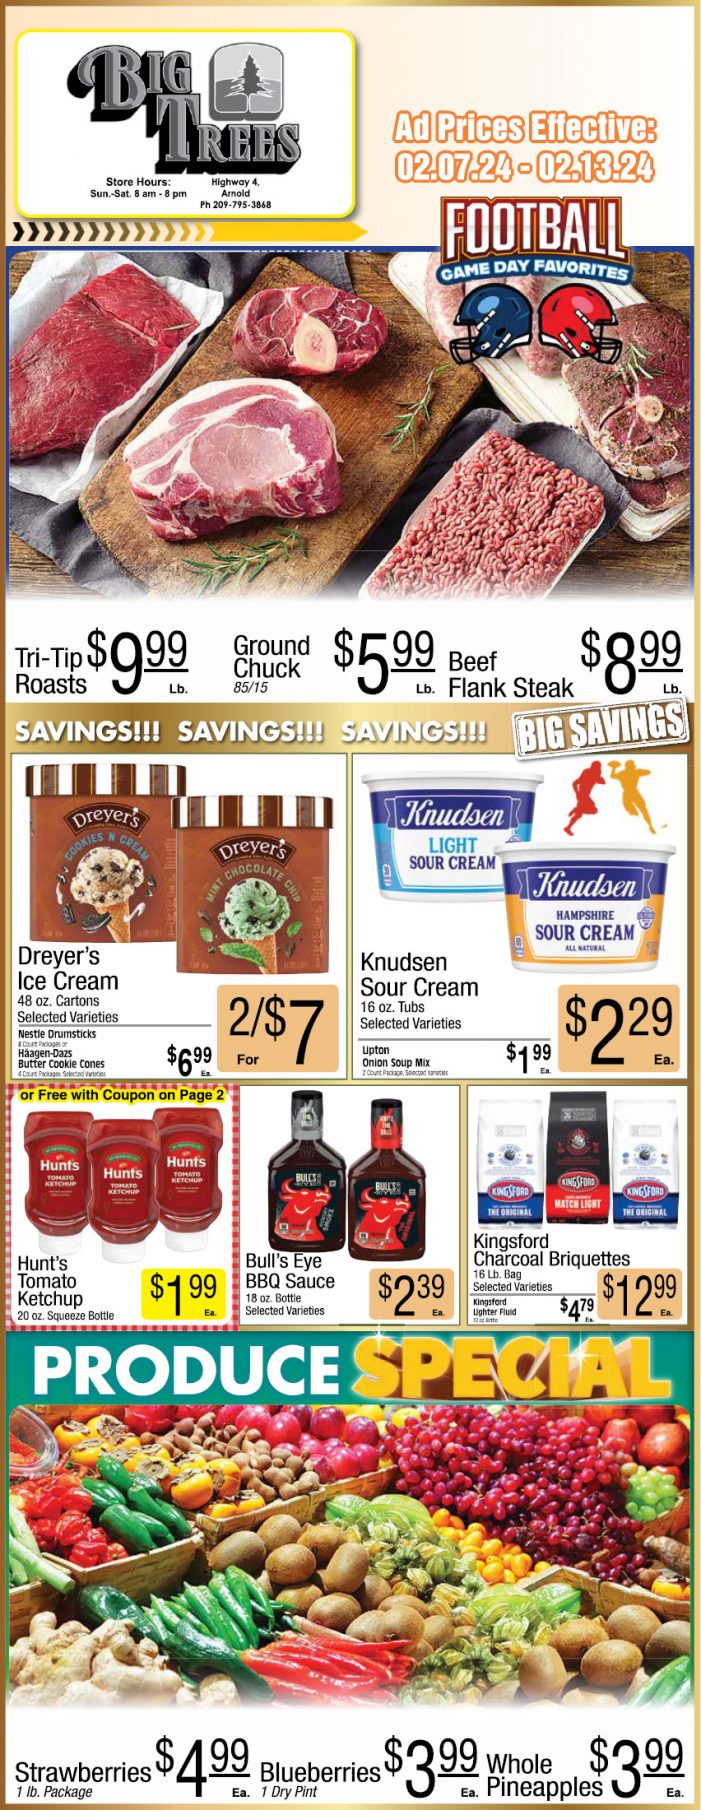 Big Trees Market Weekly Ad, Grocery, Produce, Meat & Deli Specials Through February 13th! Shop Local & Save!